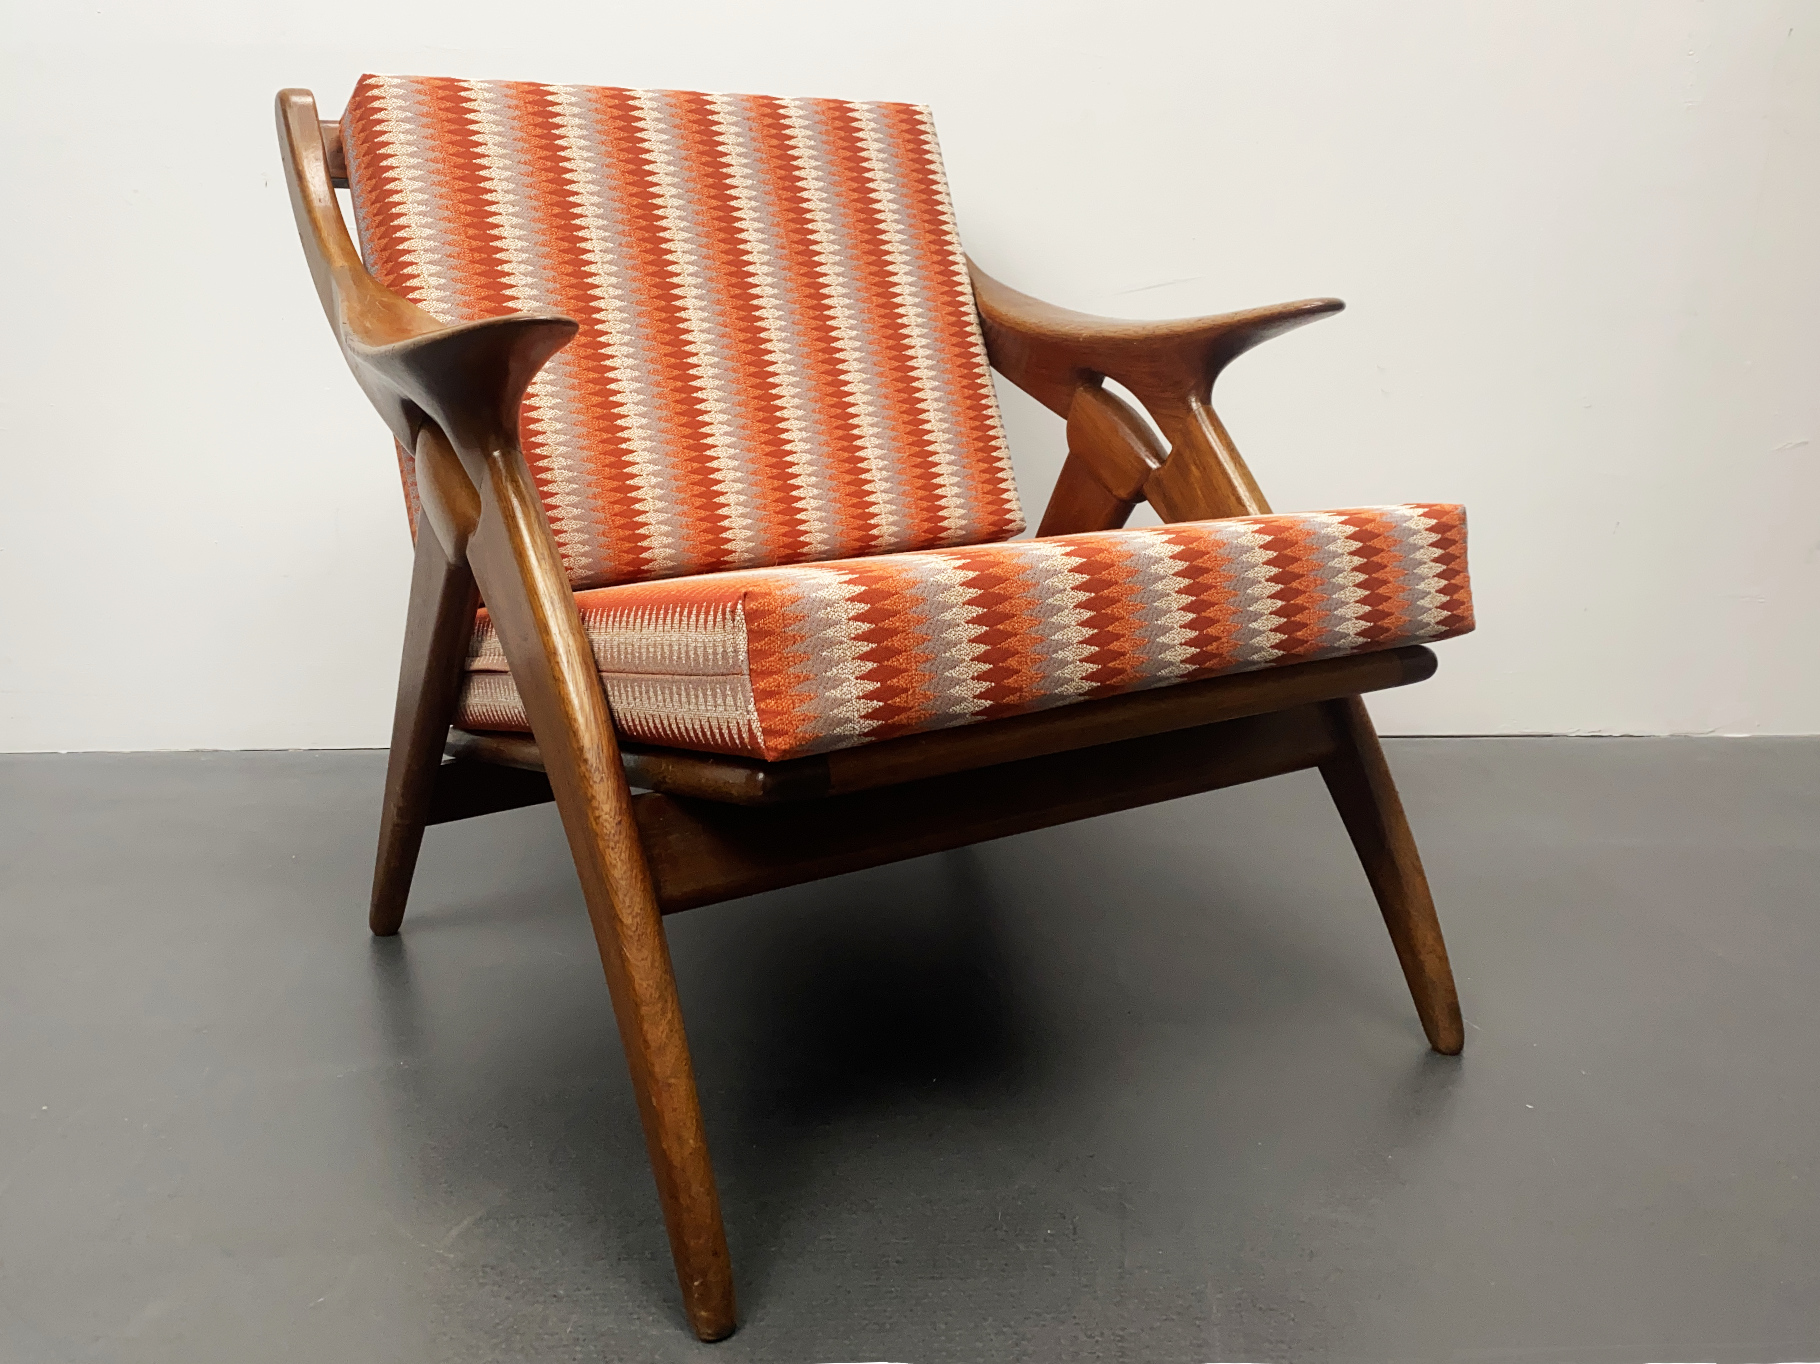 Armchair “The Knot“, Teak Wood, by De Ster Gelderland, Netherlands, 1960s. Upholstery and fabric have been renewed.